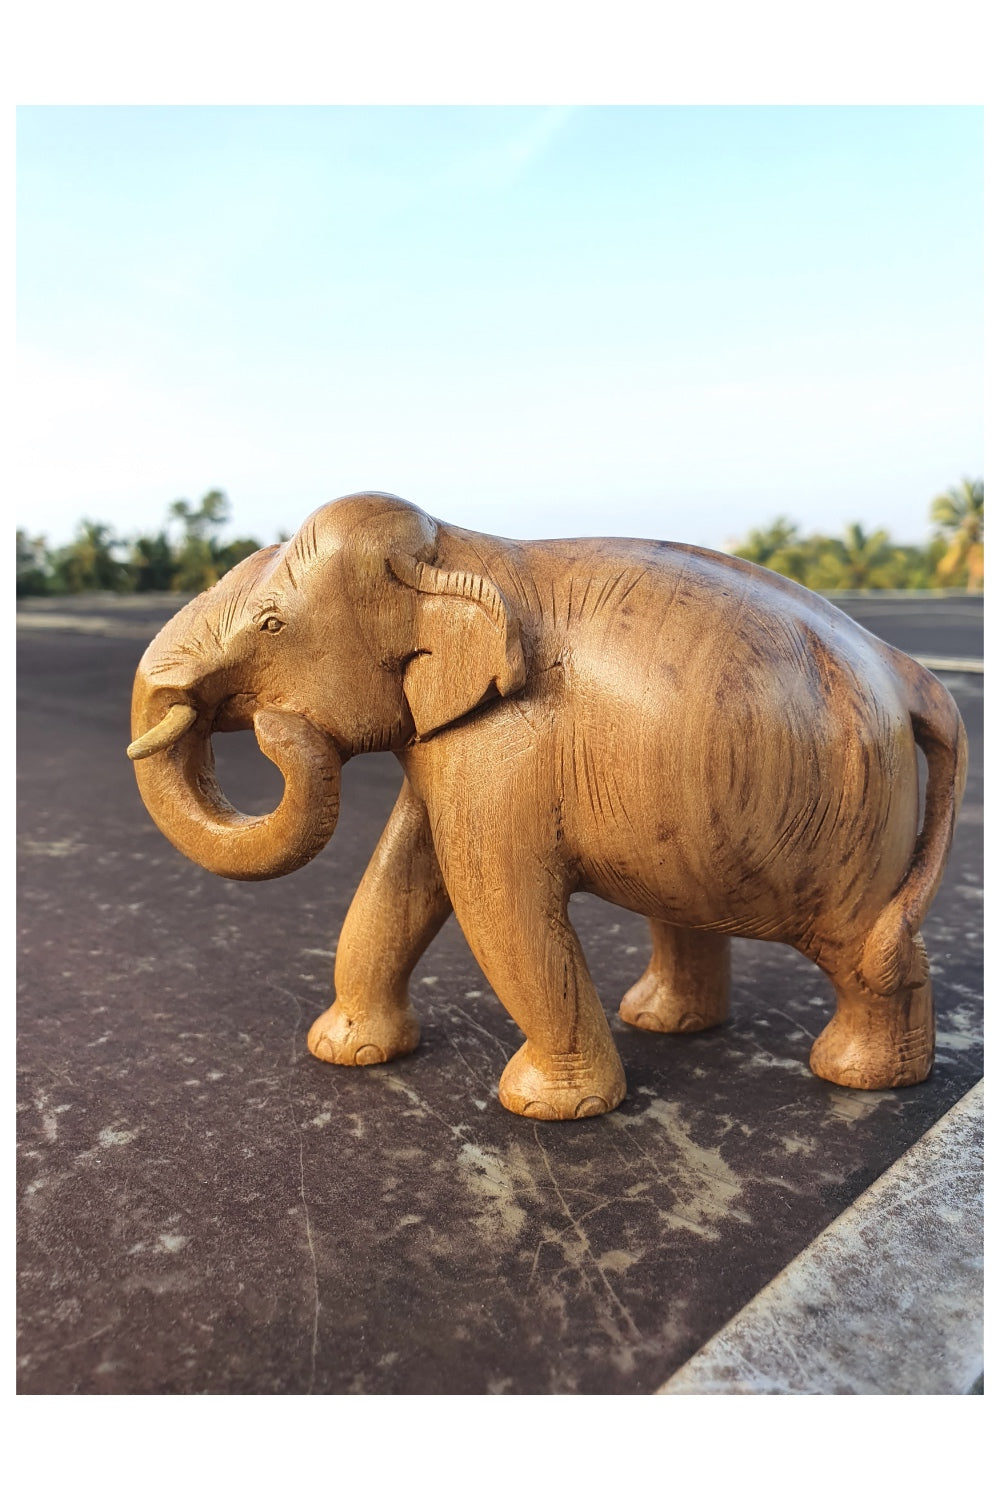 Southloom Handmade Elephant Handicraft (Carved from White Wood)